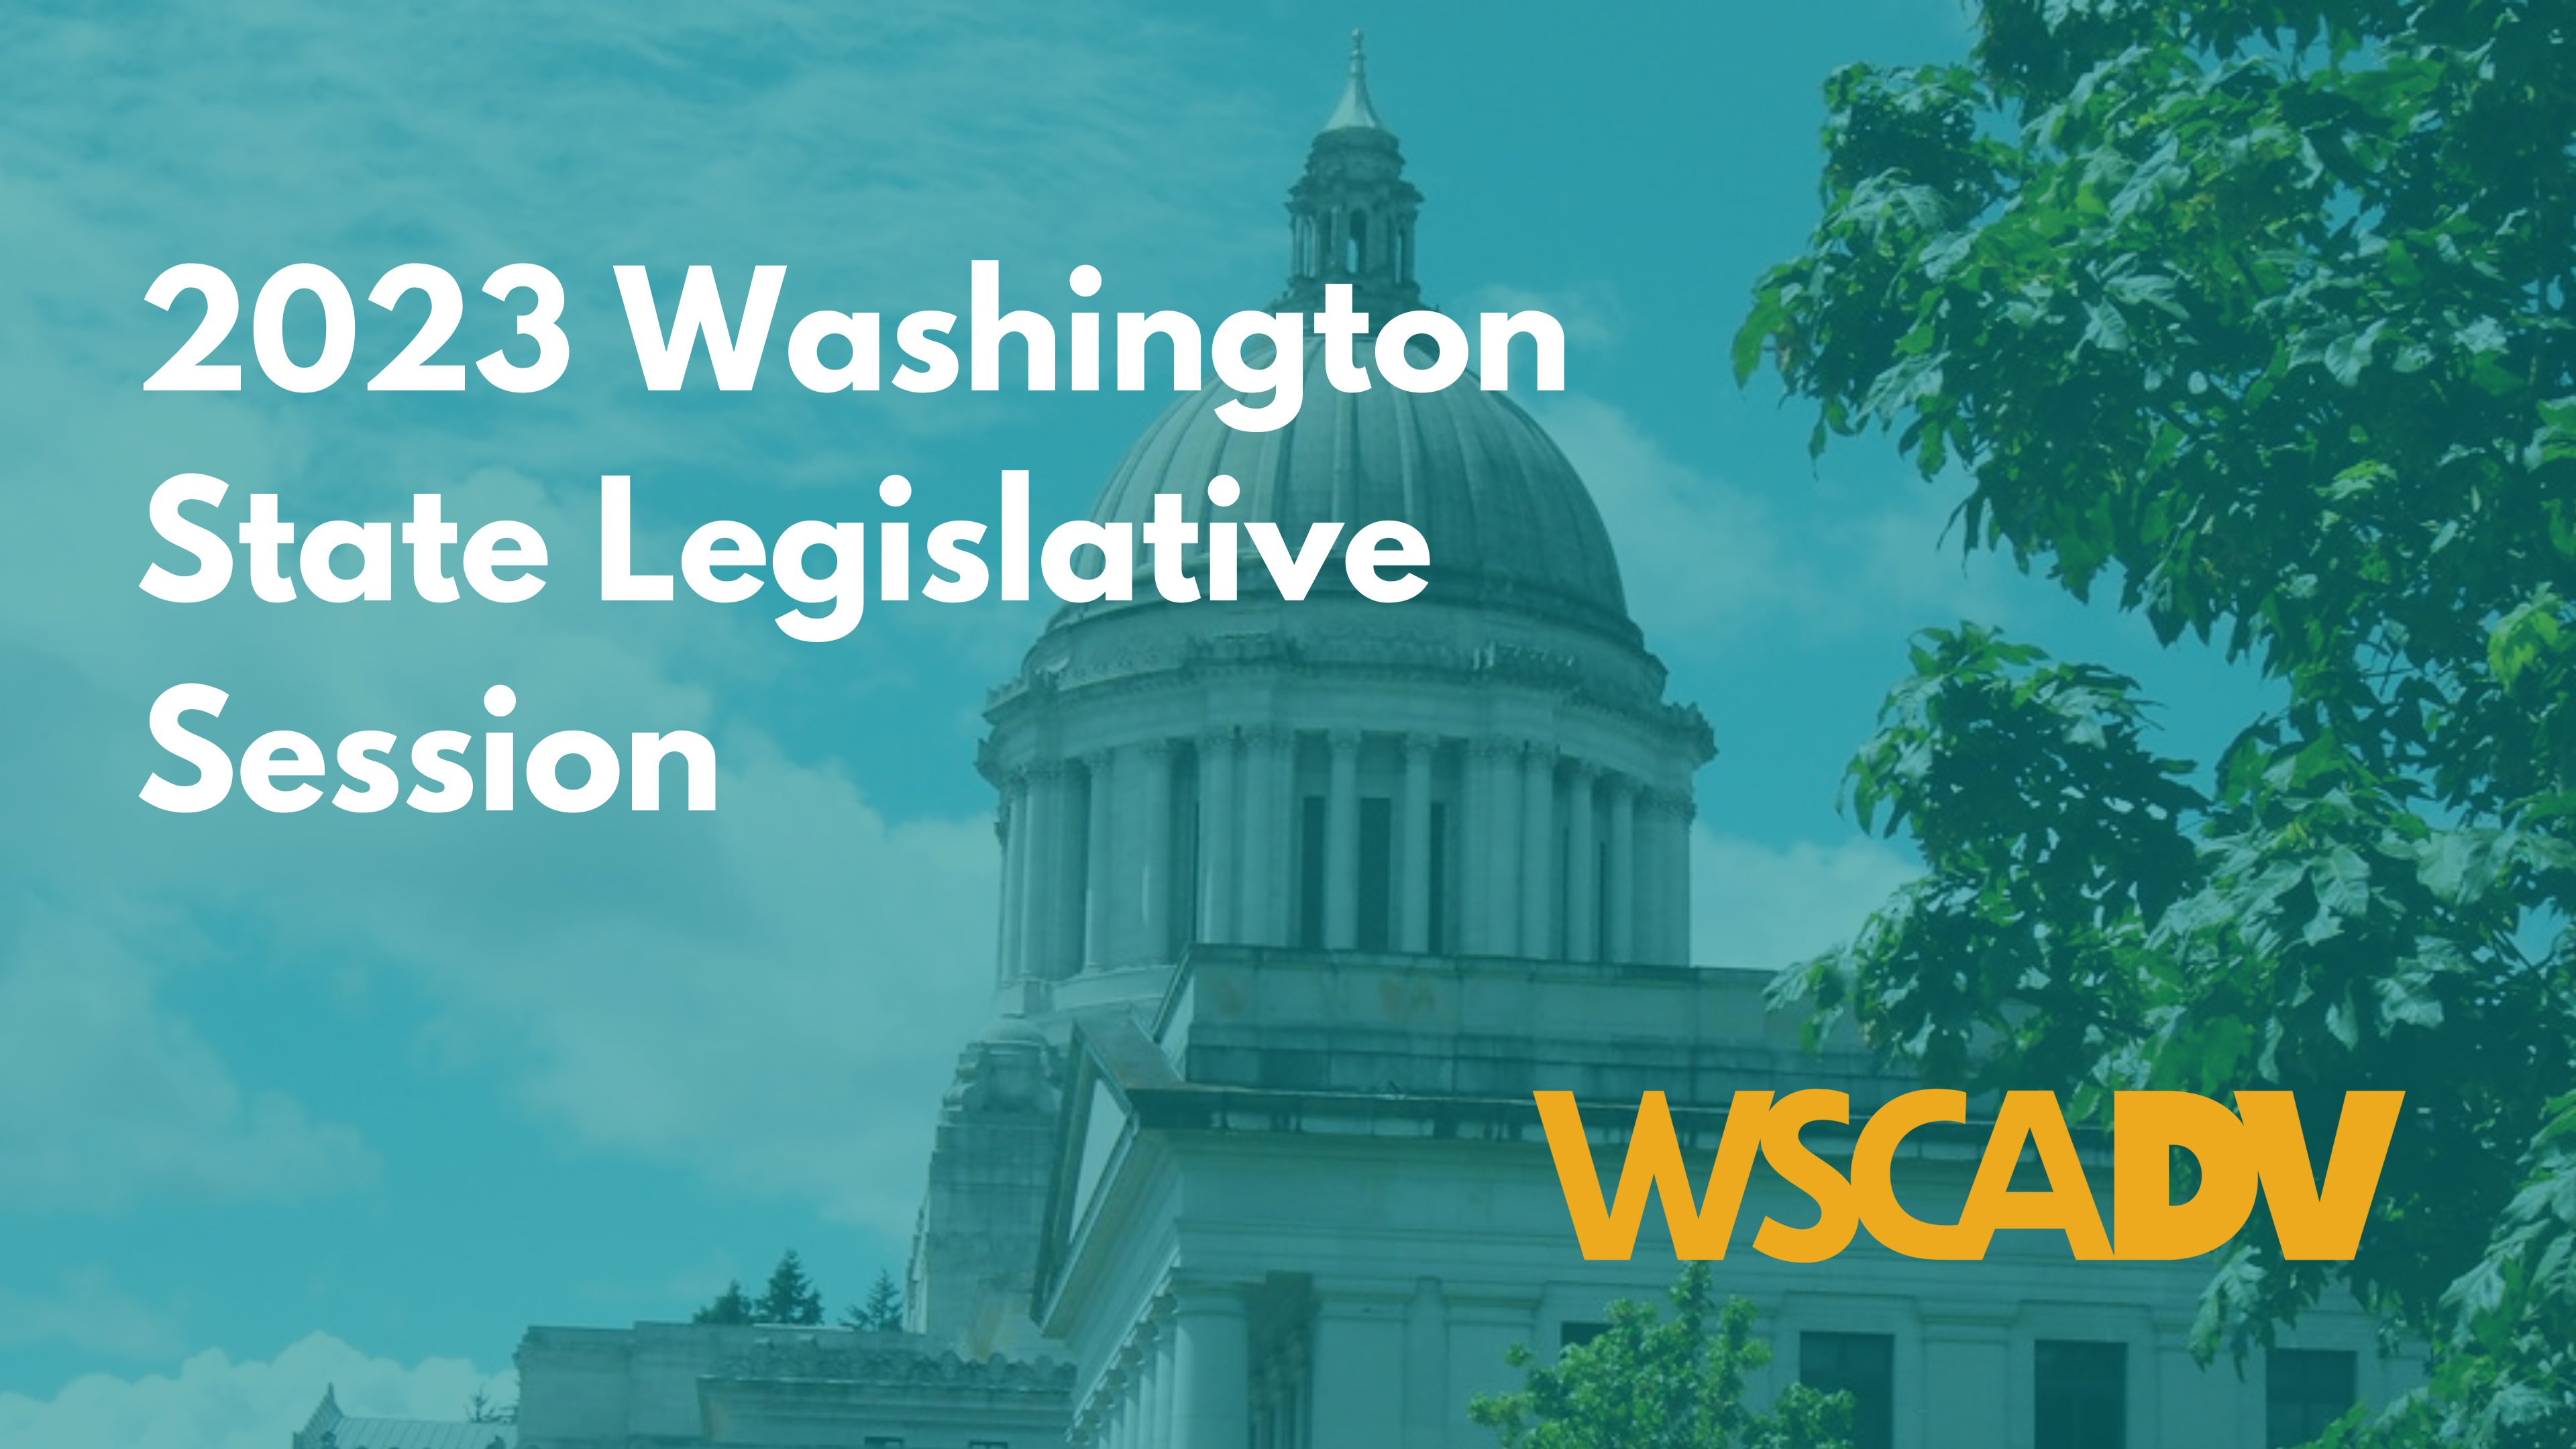 The WA State Capitol Building is in the background with white text that says "2023 Washington State Legislative Session." The gold WSCADV logo is in the lower right corner.